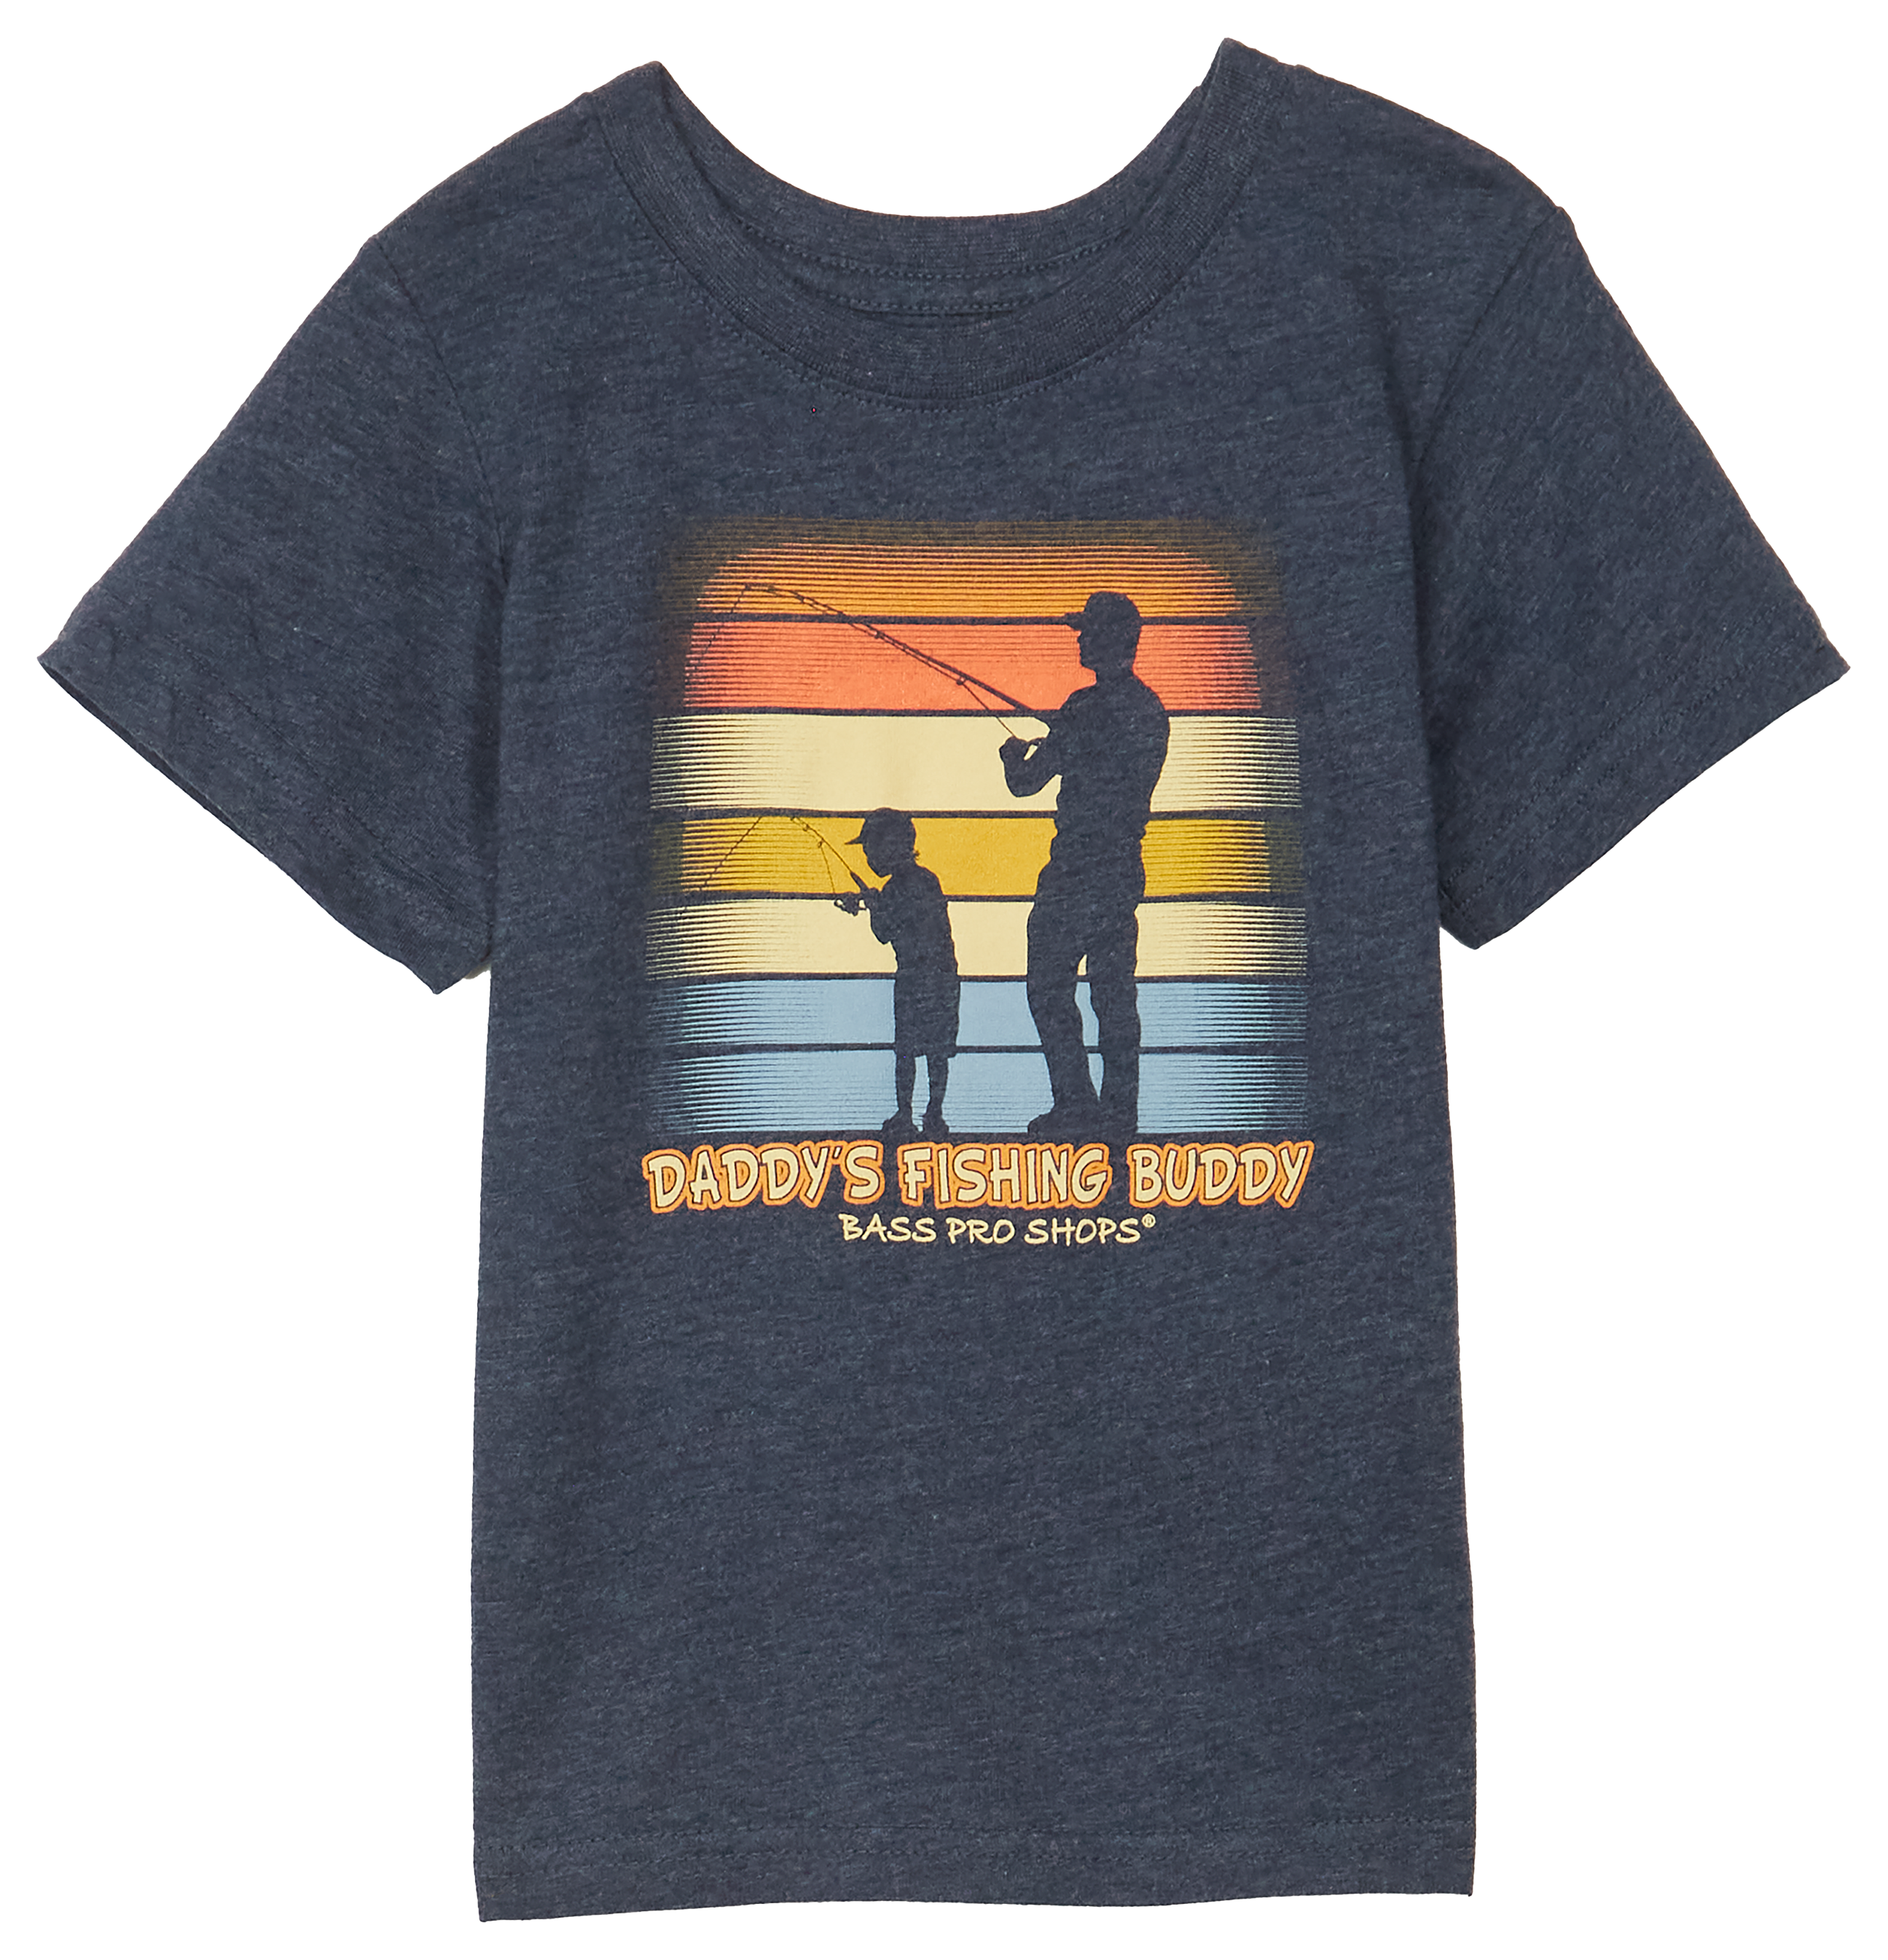 Bass Pro Shops Daddy's Fishing Buddy Short-Sleeve T-Shirt for Toddlers